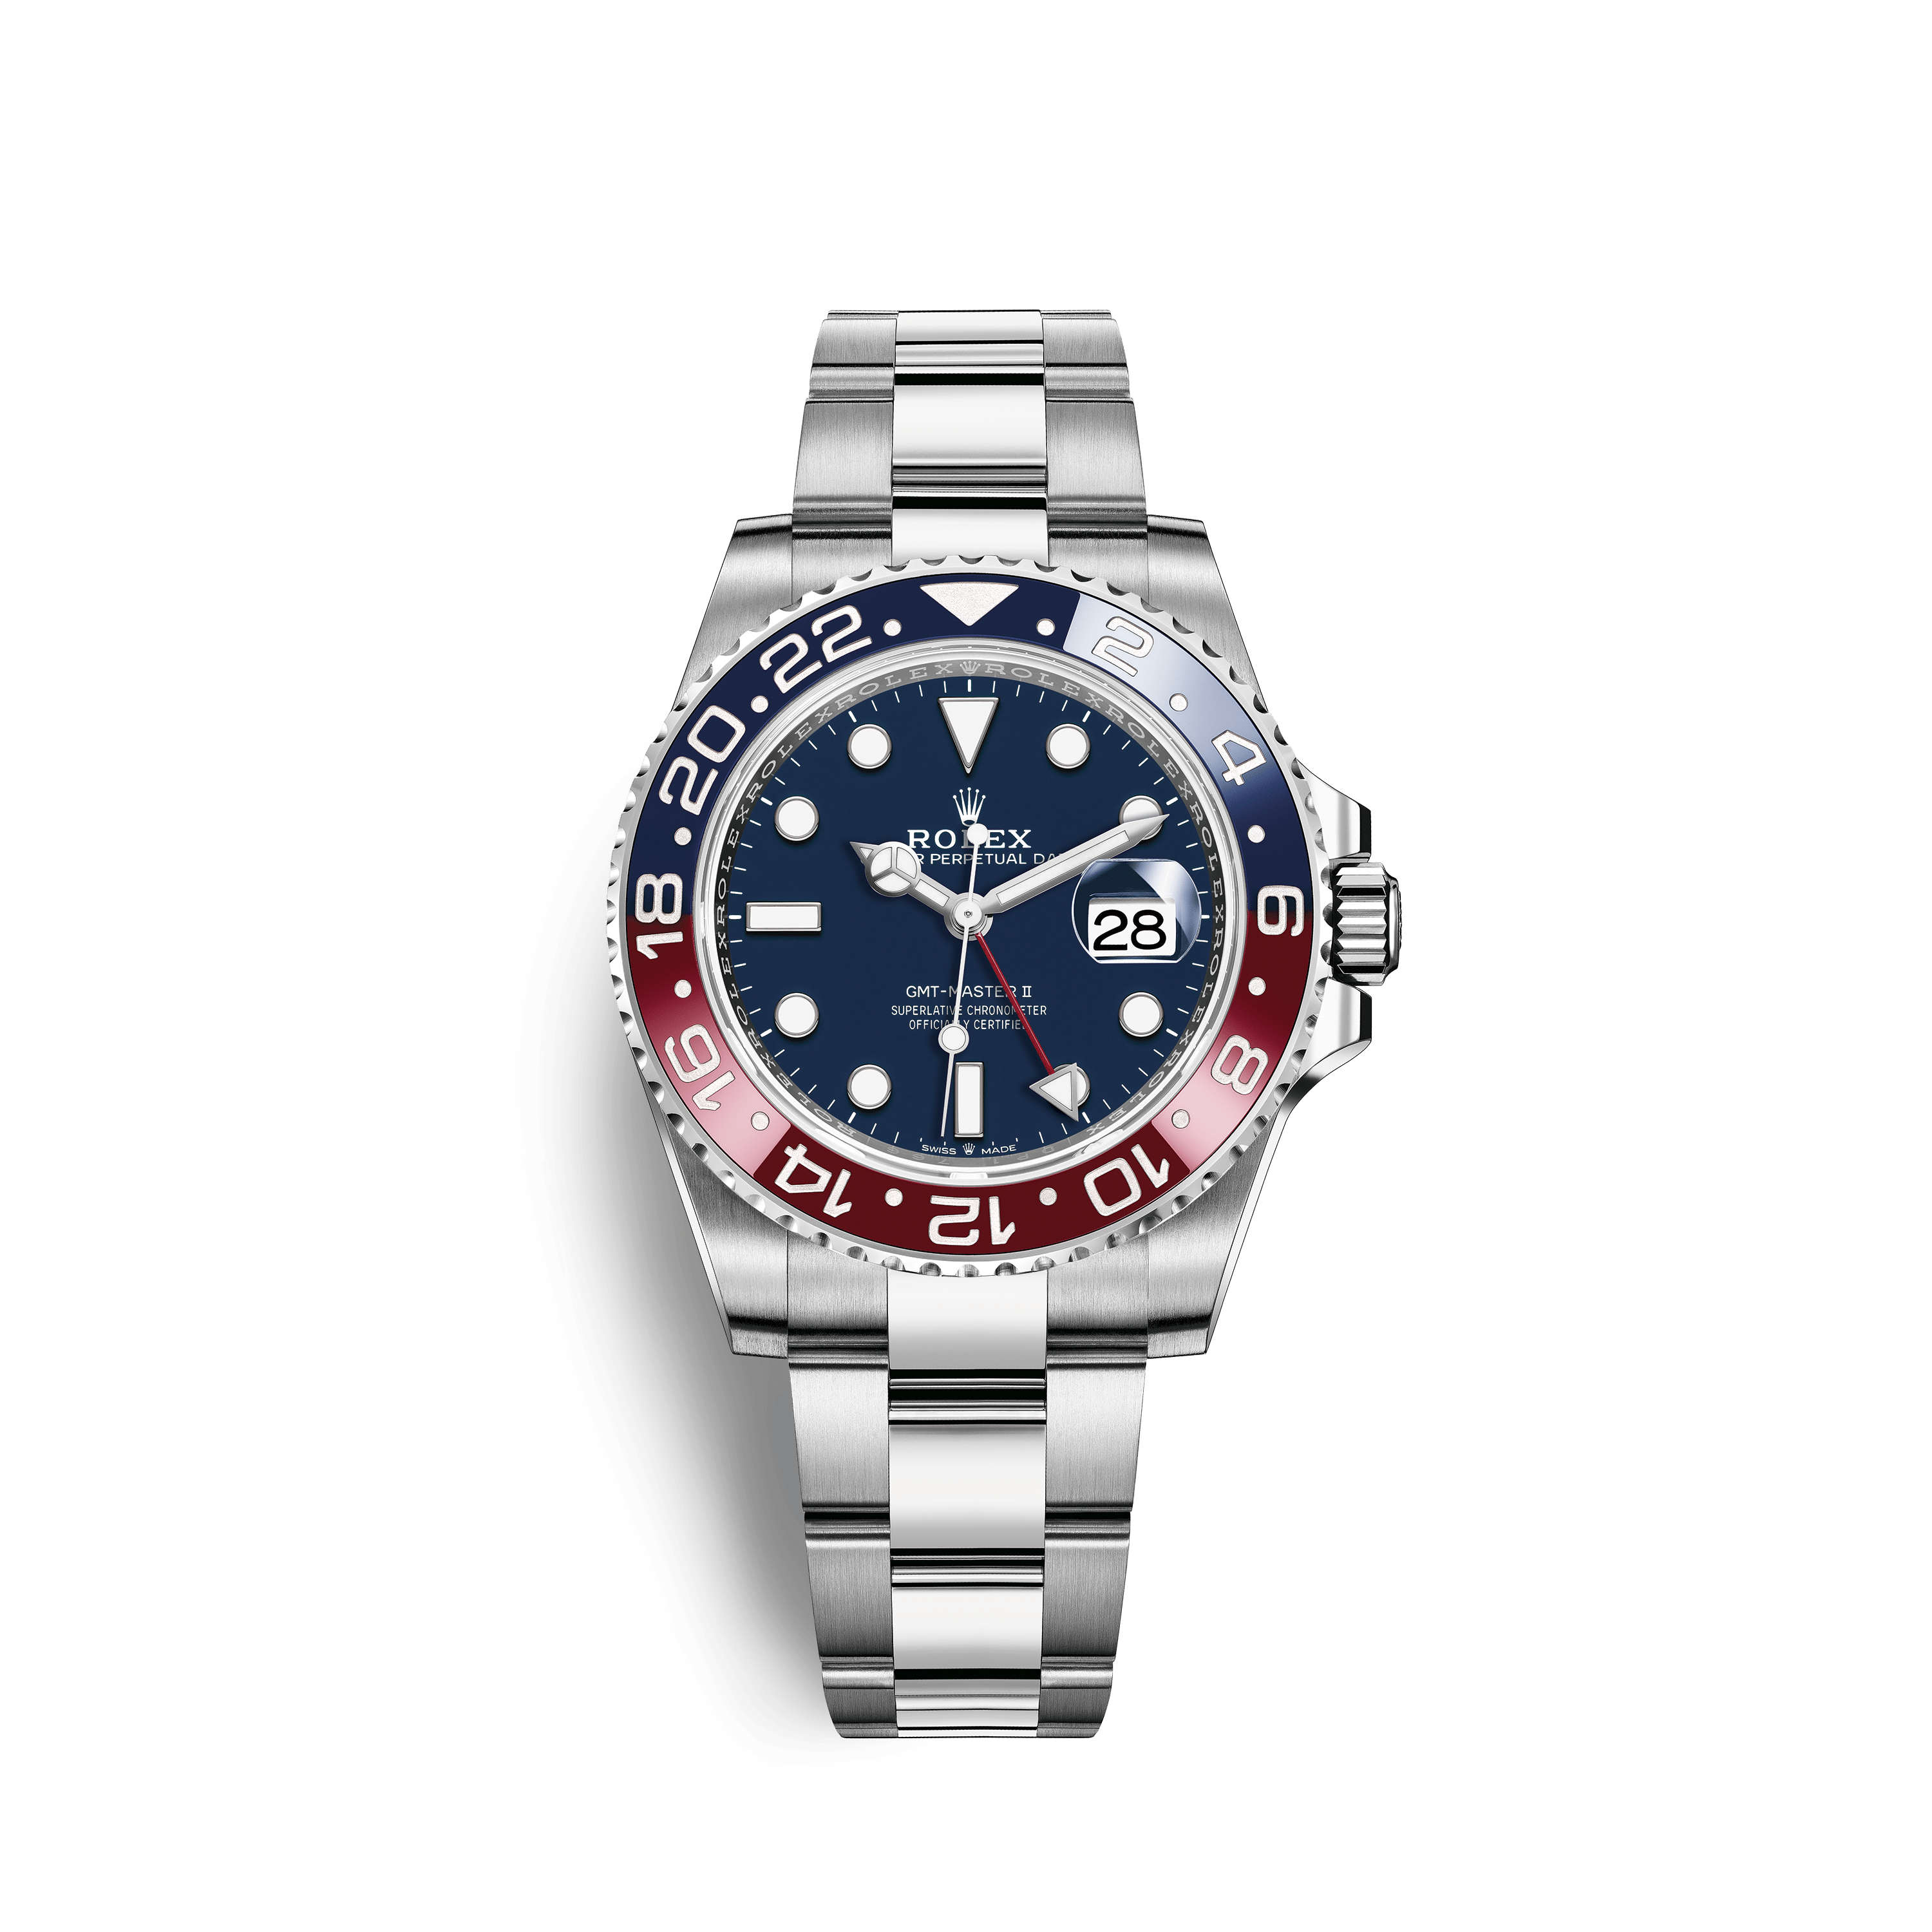 Rolex GMT-Master II | 126719BLRO | GMT-Master II | Coloured dial | 24-Hour Rotatable Bezel | Midnight blue dial | 18 ct white gold | m126719blro-0003 | Men Watch | Rolex Official Retailer - Time Midas